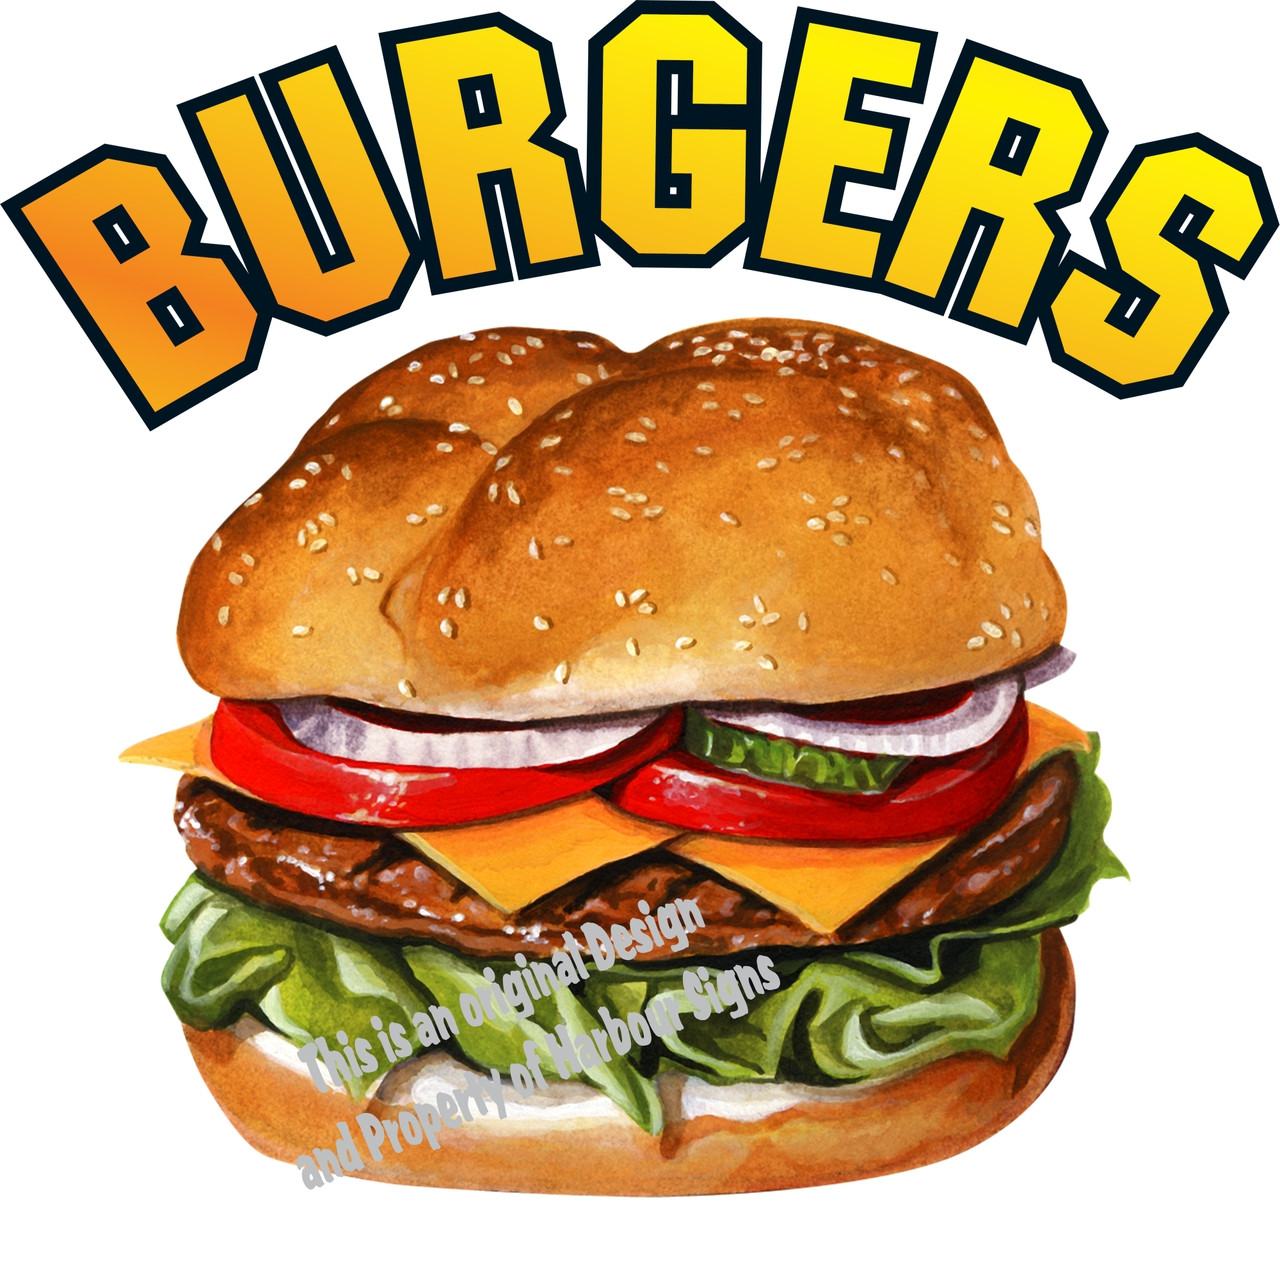 Burgers DECAL Choose Your Size Concession Food Truck Vinyl Sticker M 